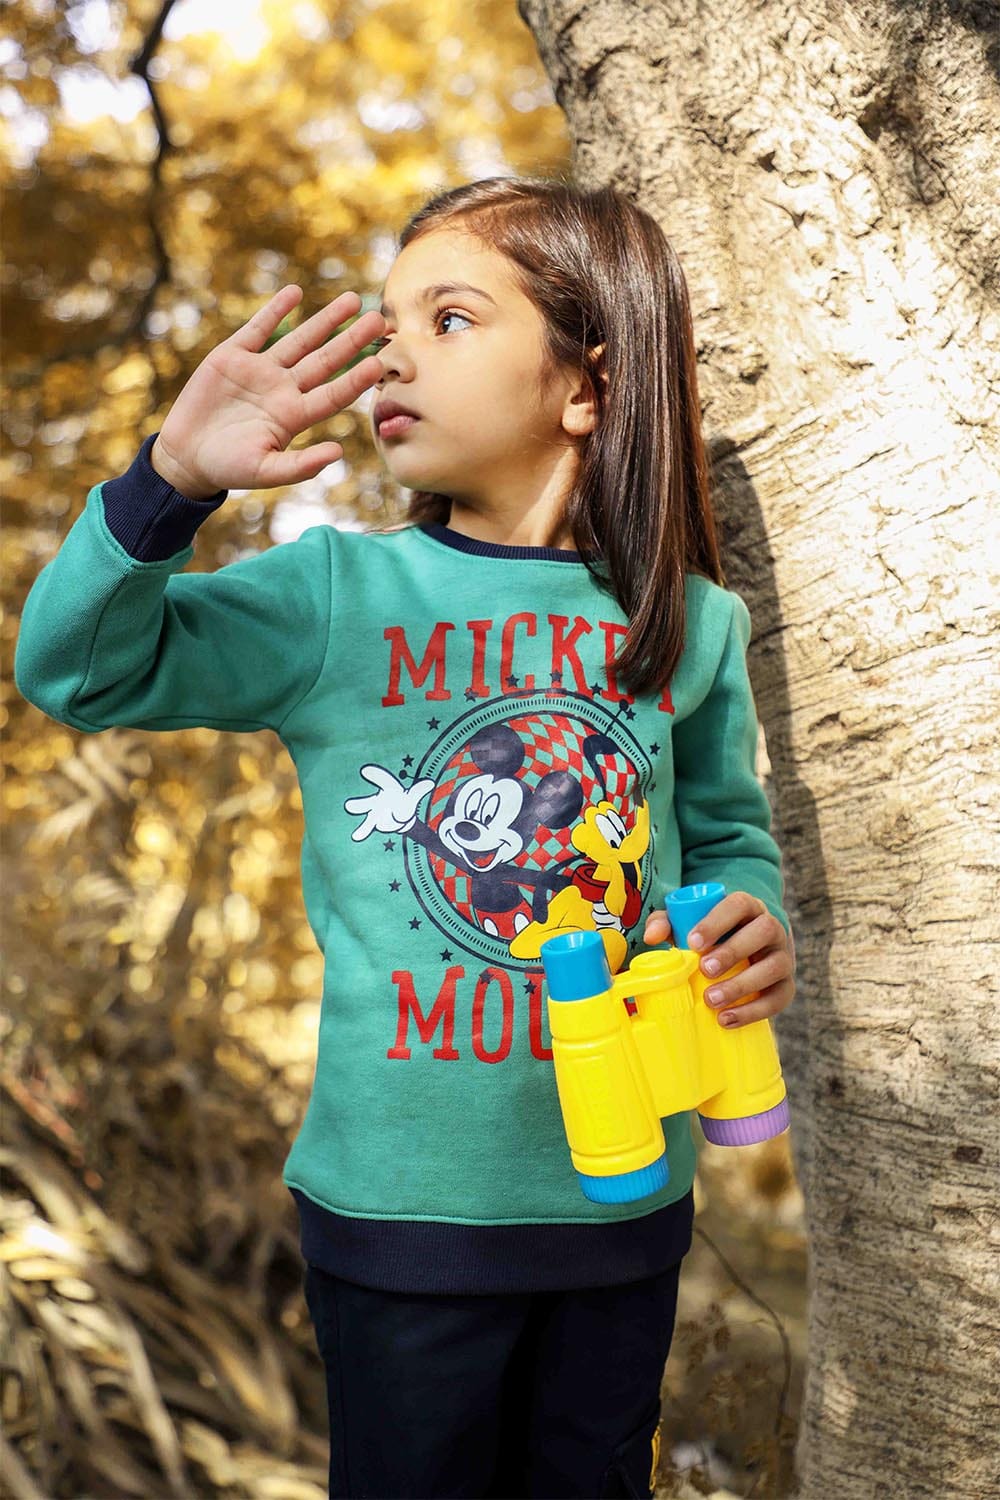 Hope Not Out by Shahid Afridi Girls Knit T-Shirt MICKEY MOUSE PRINT ON FRONT